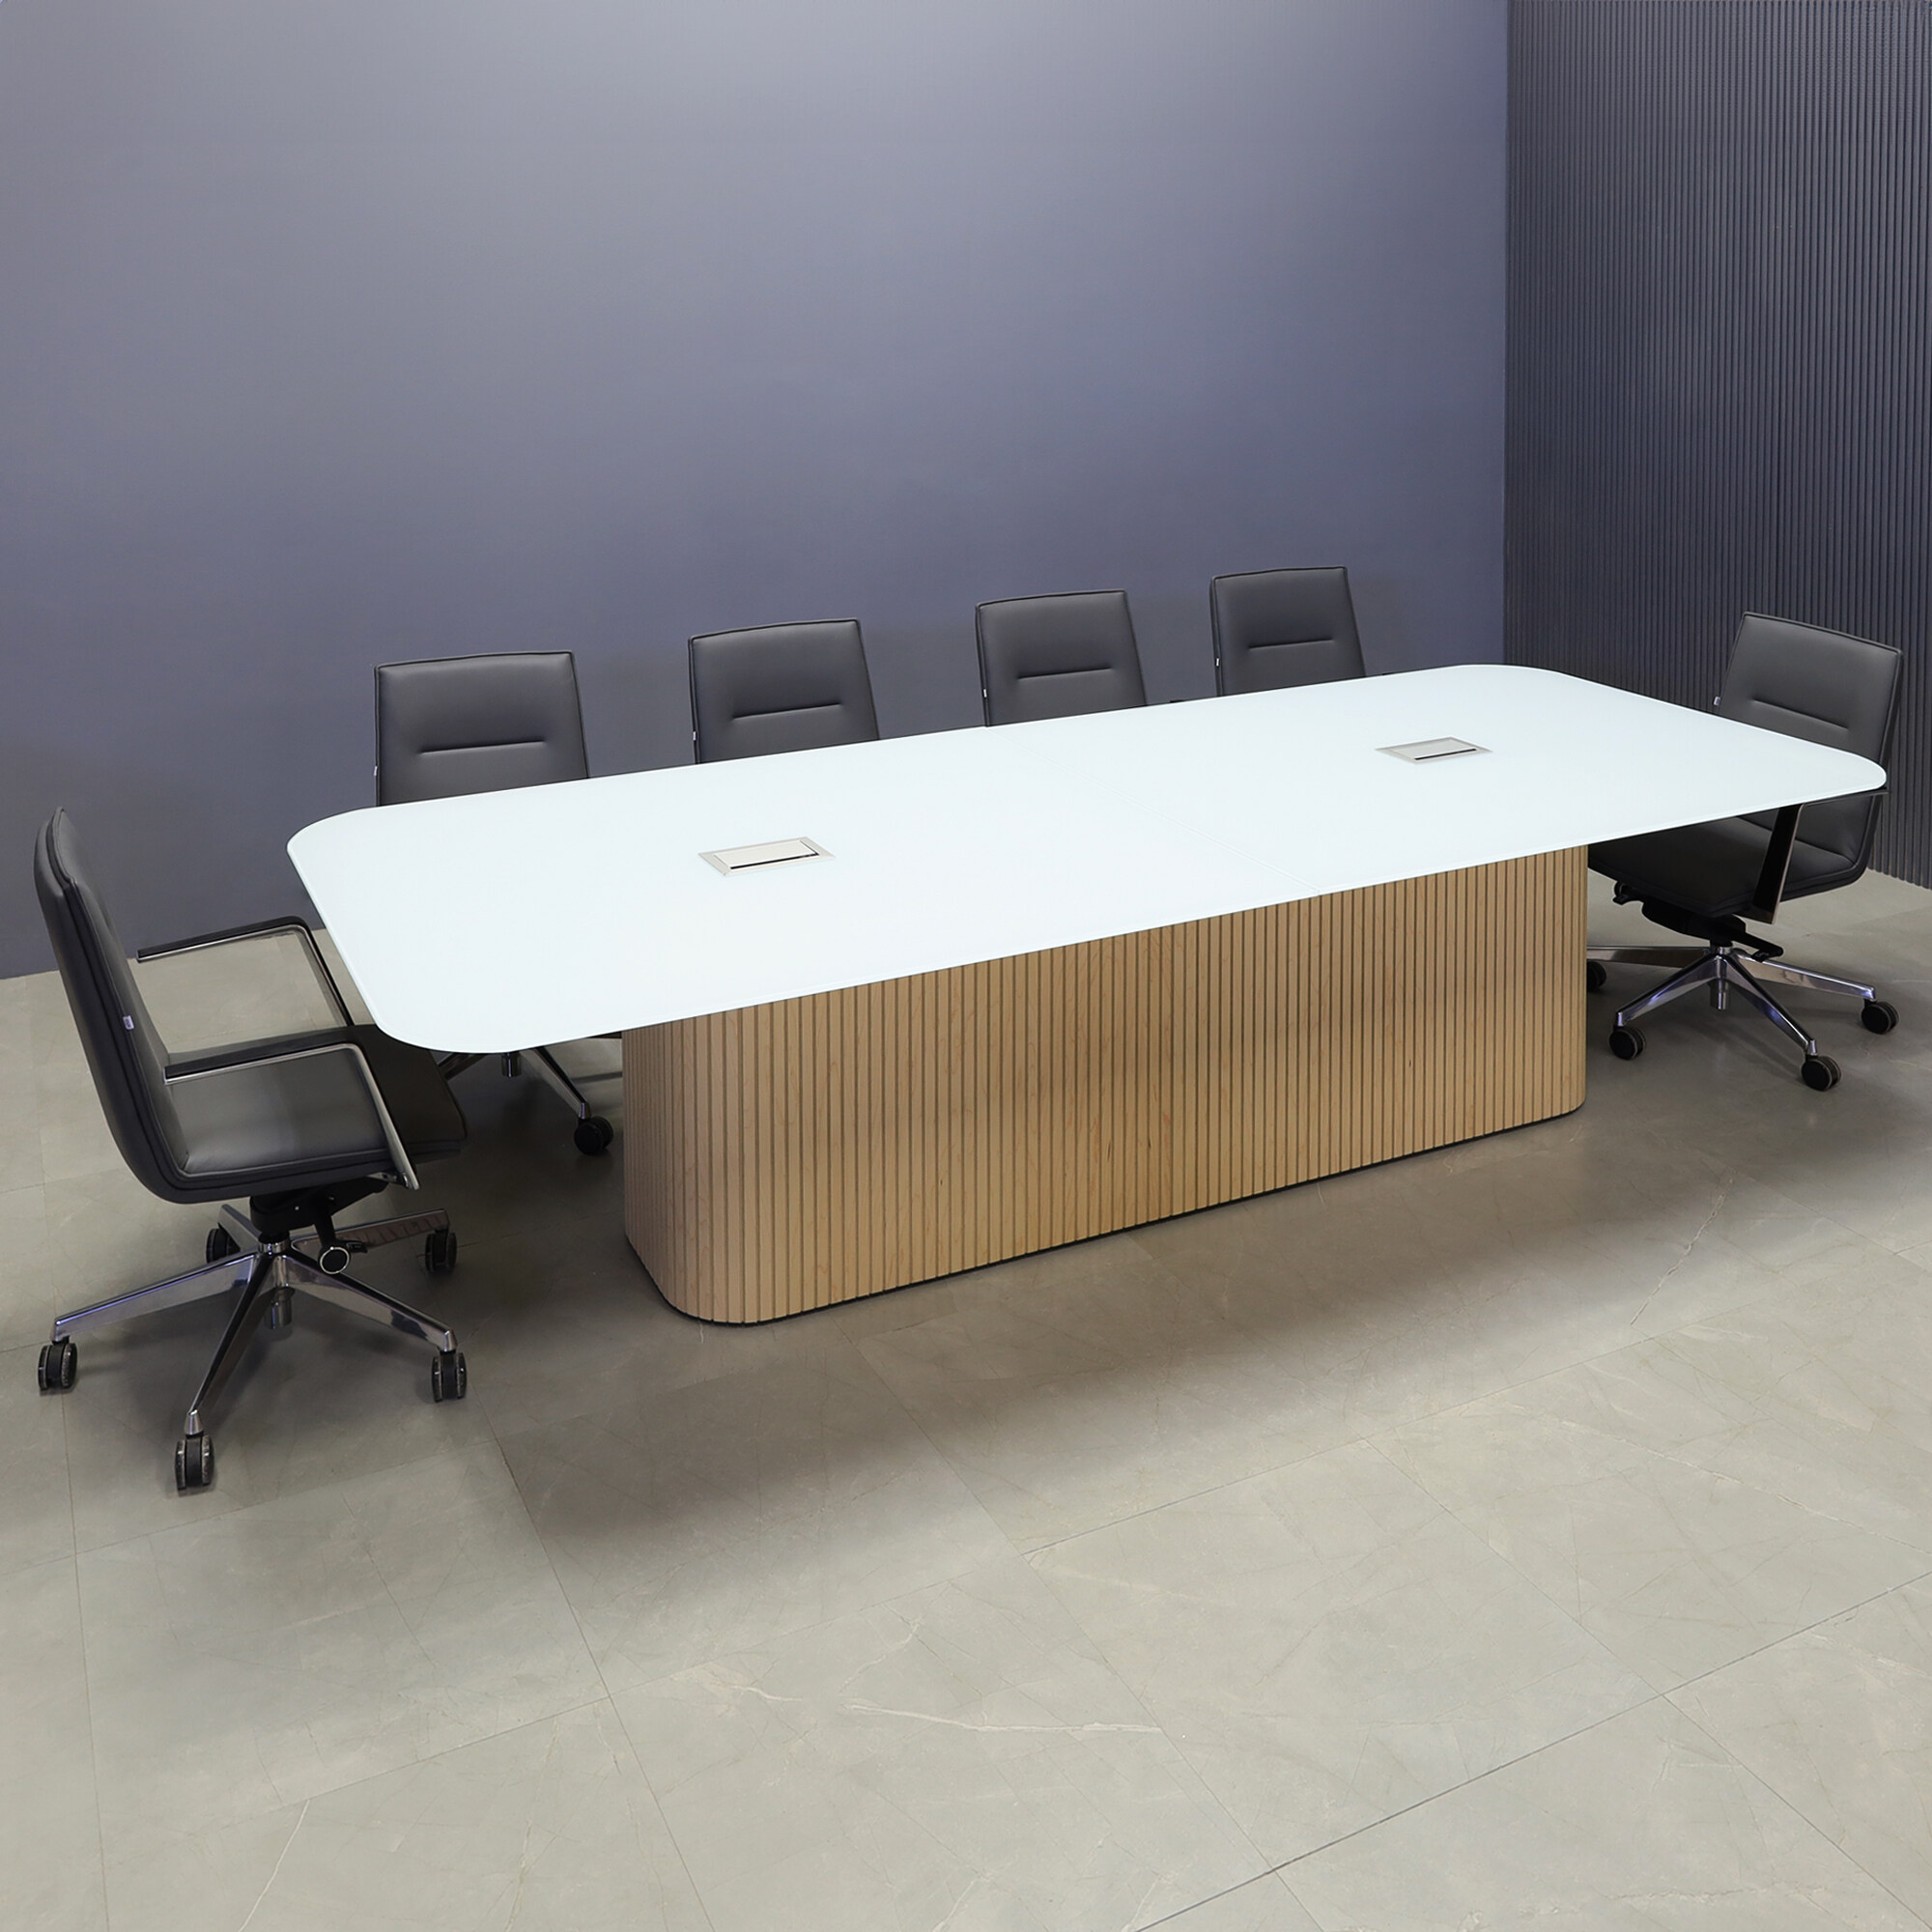 120-inch Omaha Rectangular Conference Table in 1/2